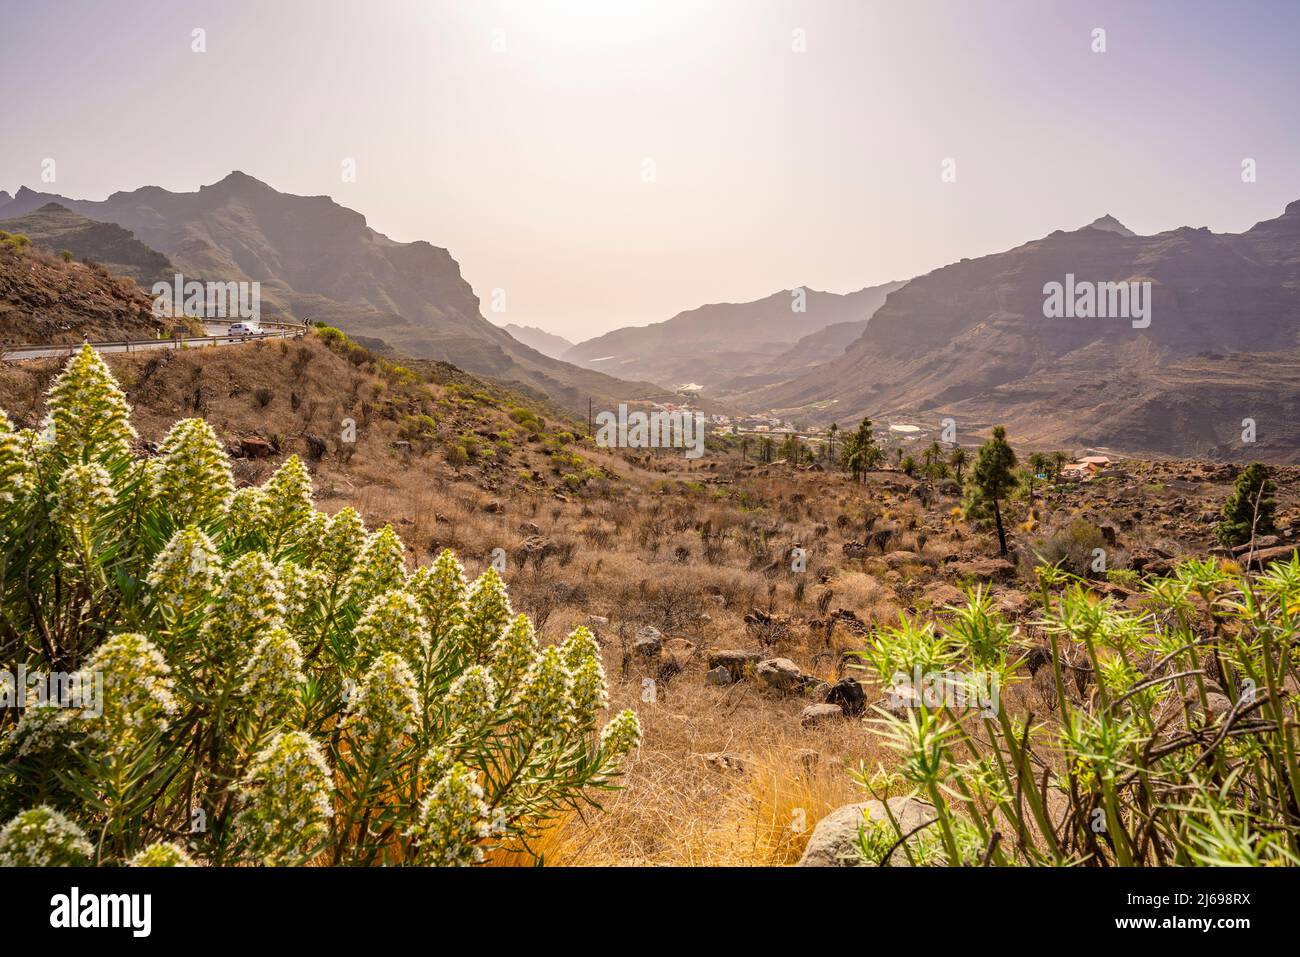 View of road and flora in mountainous landscape near Tasarte, Gran Canaria, Canary Islands, Spain, Atlantic, Europe Stock Photo